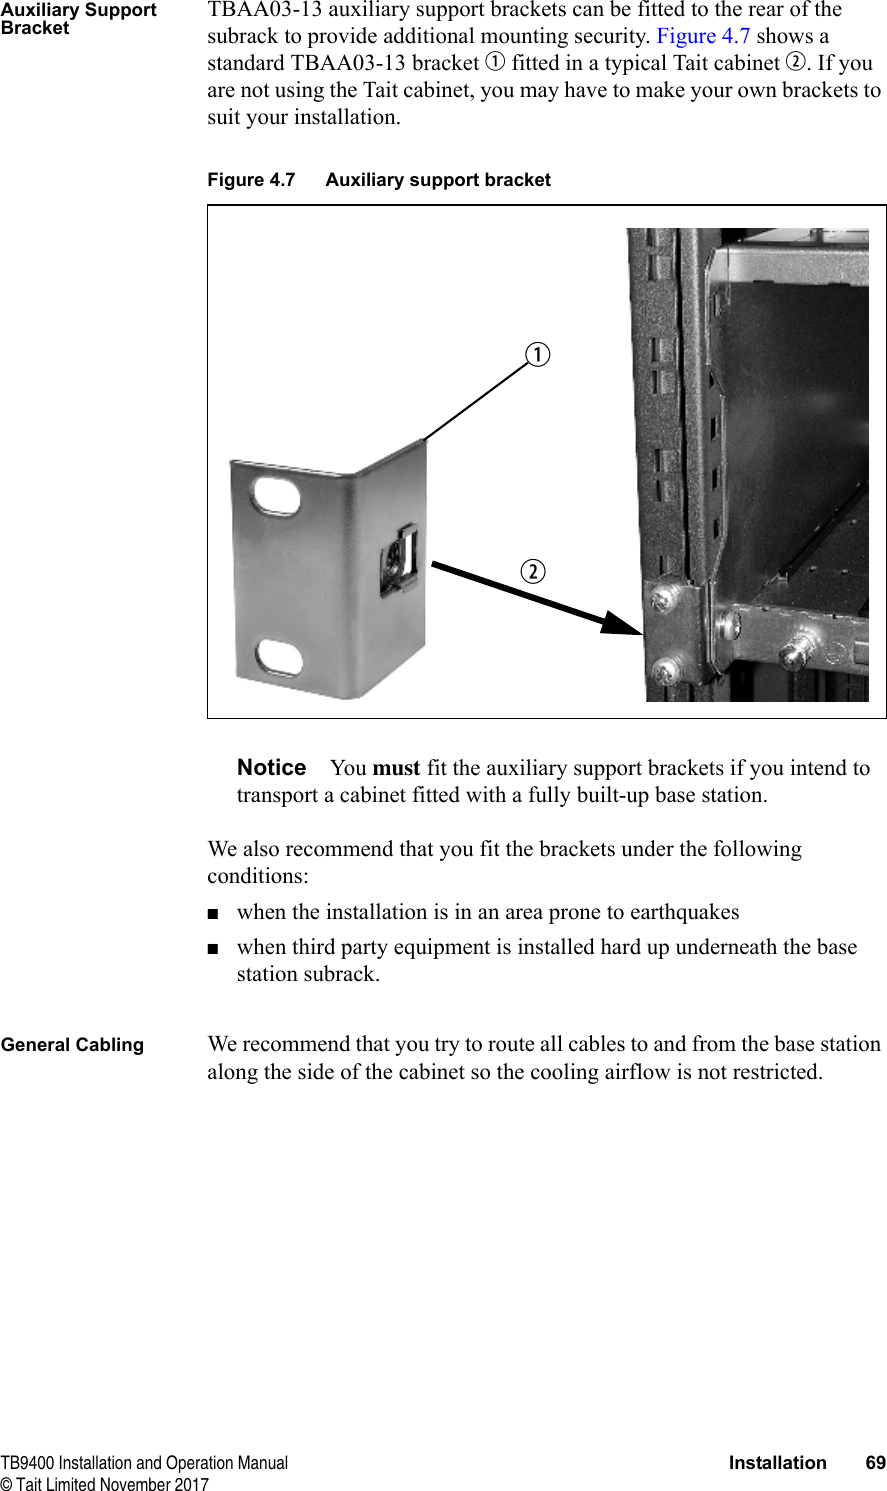  TB9400 Installation and Operation Manual Installation 69© Tait Limited November 2017Auxiliary Support BracketTBAA03-13 auxiliary support brackets can be fitted to the rear of the subrack to provide additional mounting security. Figure 4.7 shows a standard TBAA03-13 bracket b fitted in a typical Tait cabinet c. If you are not using the Tait cabinet, you may have to make your own brackets to suit your installation.Notice You must fit the auxiliary support brackets if you intend to transport a cabinet fitted with a fully built-up base station.We also recommend that you fit the brackets under the following conditions:■when the installation is in an area prone to earthquakes■when third party equipment is installed hard up underneath the base station subrack.General Cabling We recommend that you try to route all cables to and from the base station along the side of the cabinet so the cooling airflow is not restricted.Figure 4.7 Auxiliary support bracketcb